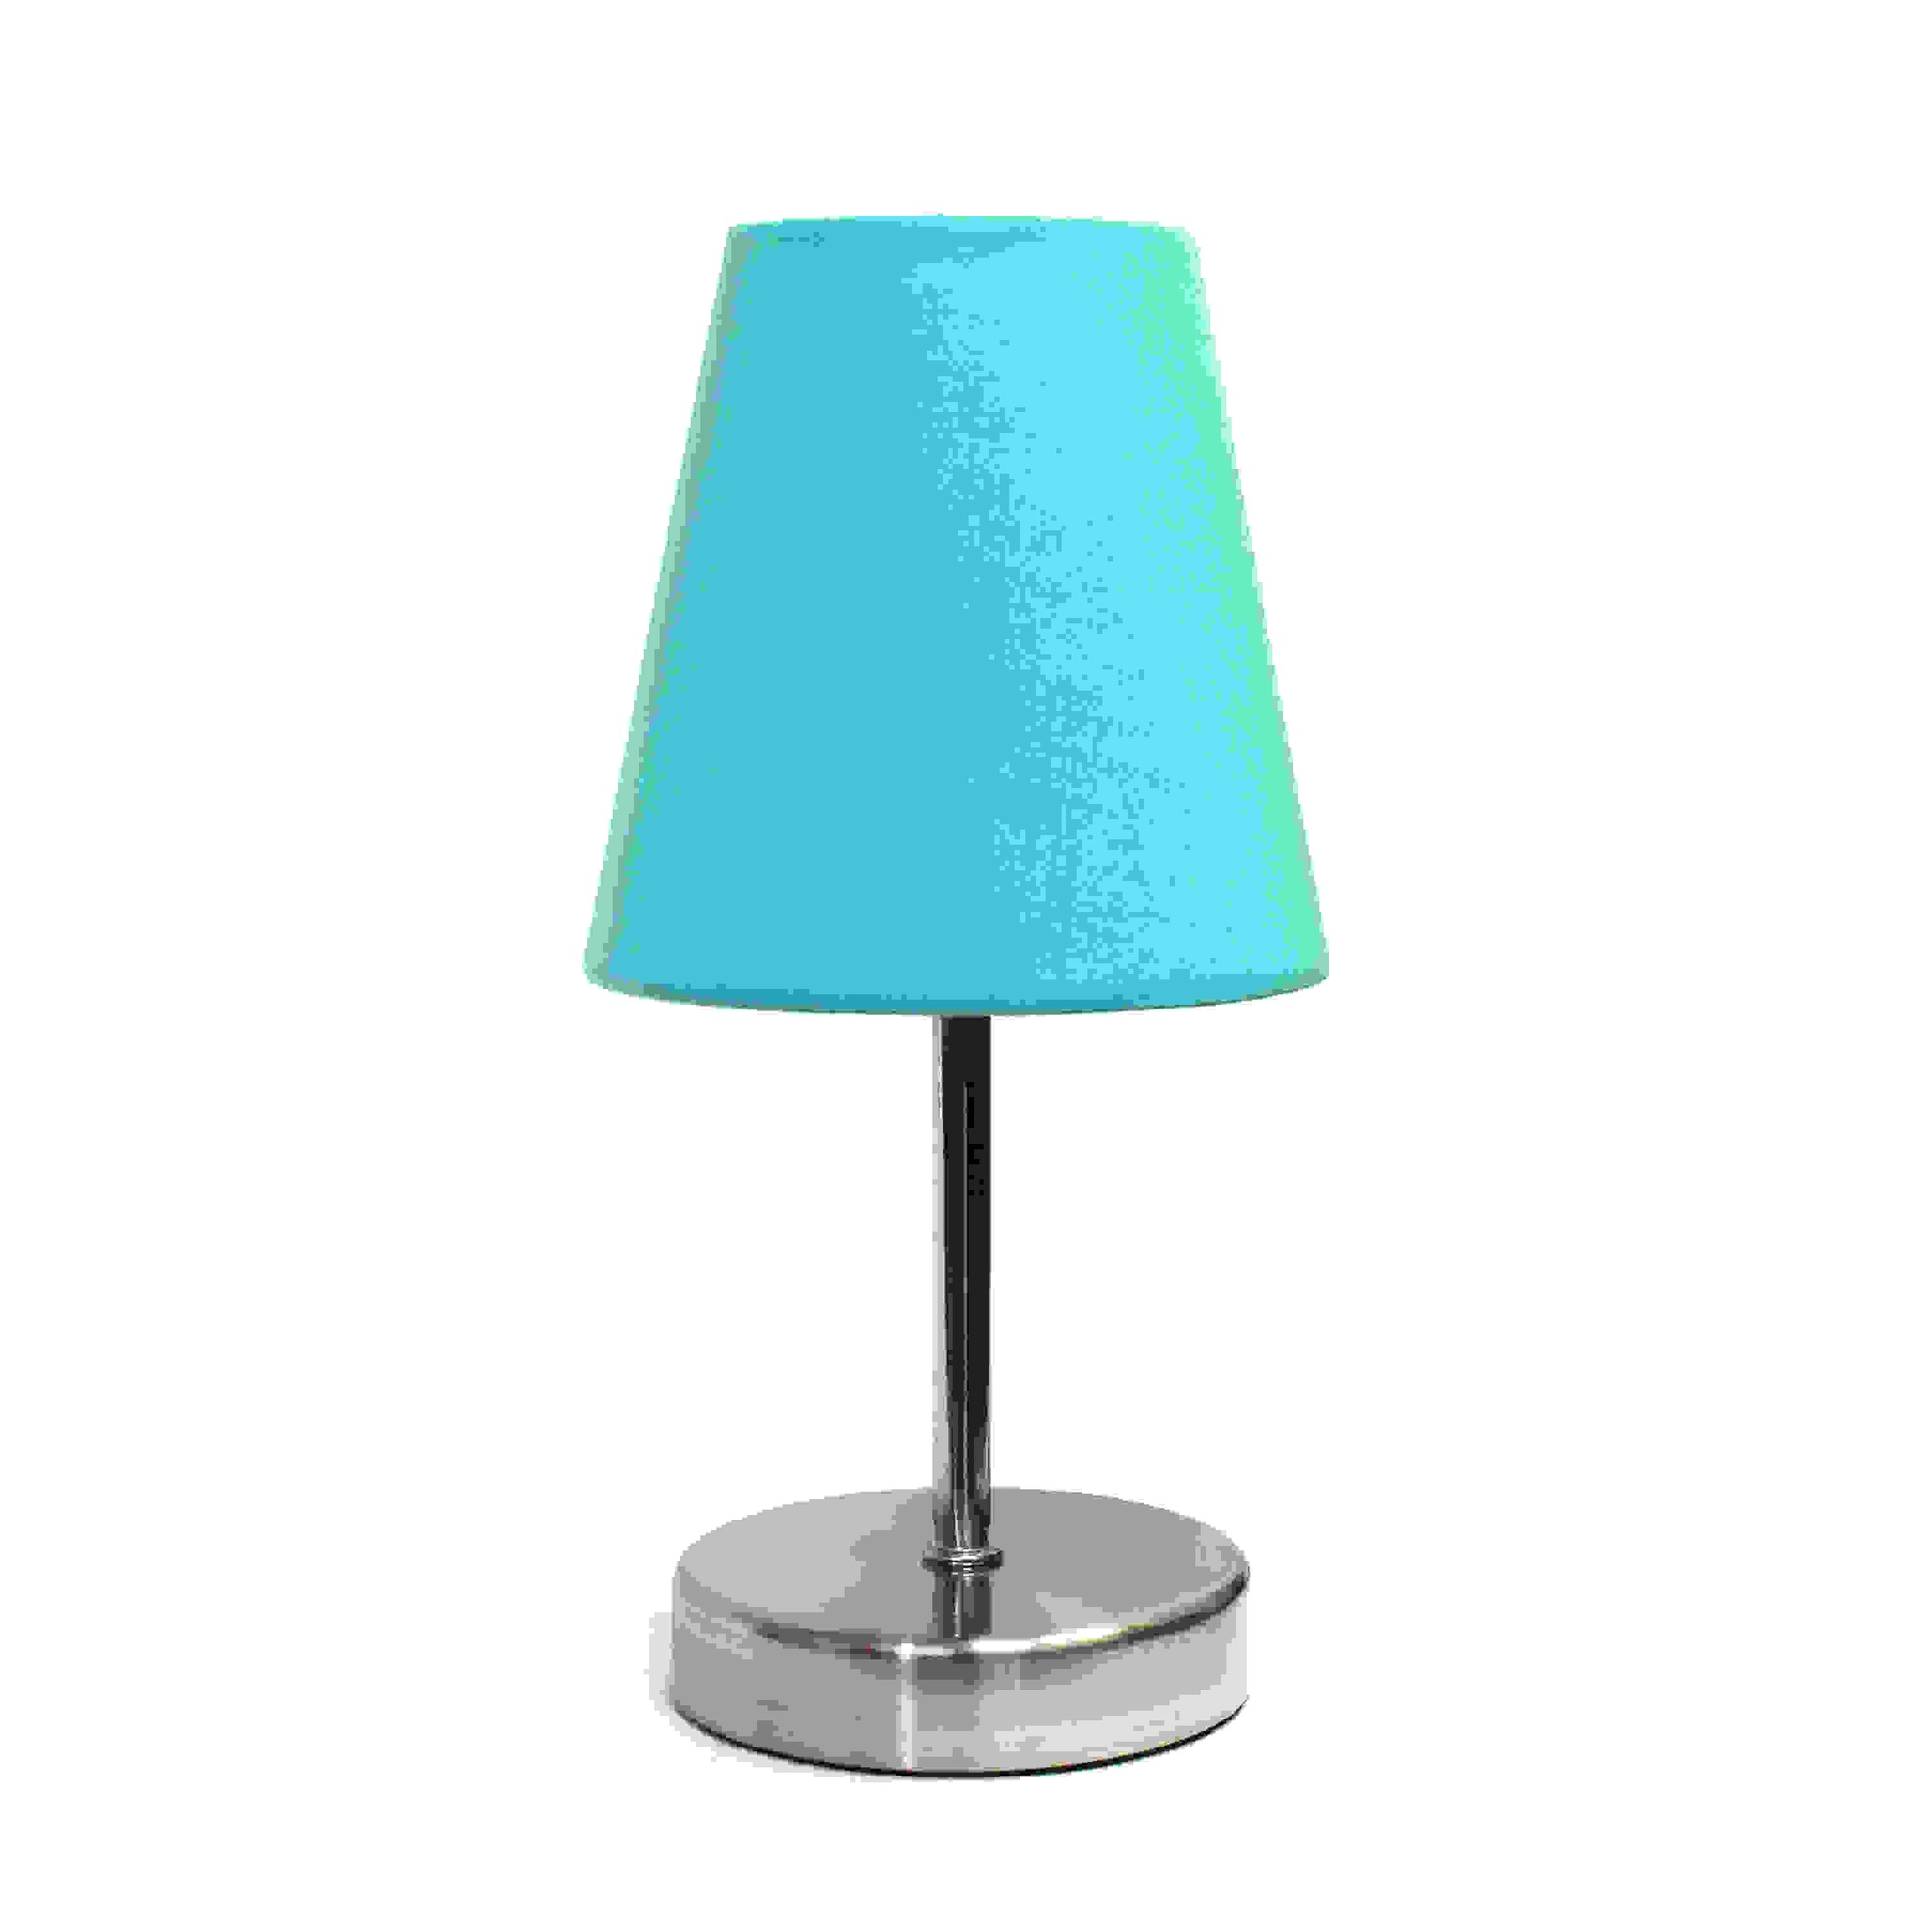 Simple Designs Sand Nickel Mini Basic Table Lamp with Fabric Shade, Blue